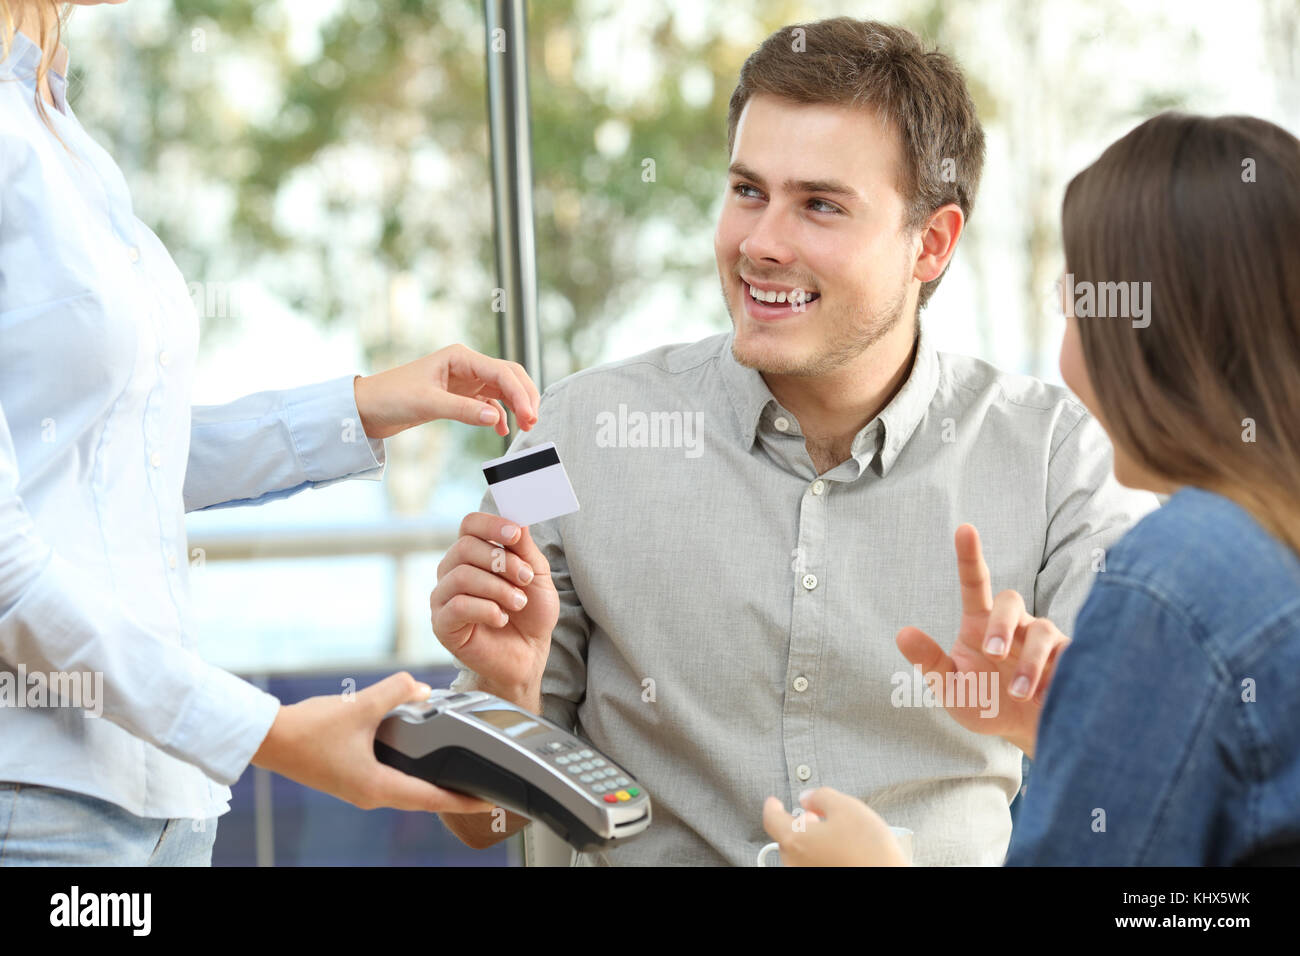 Couple ready to pay consumption with a credit card in a restaurant Stock Photo